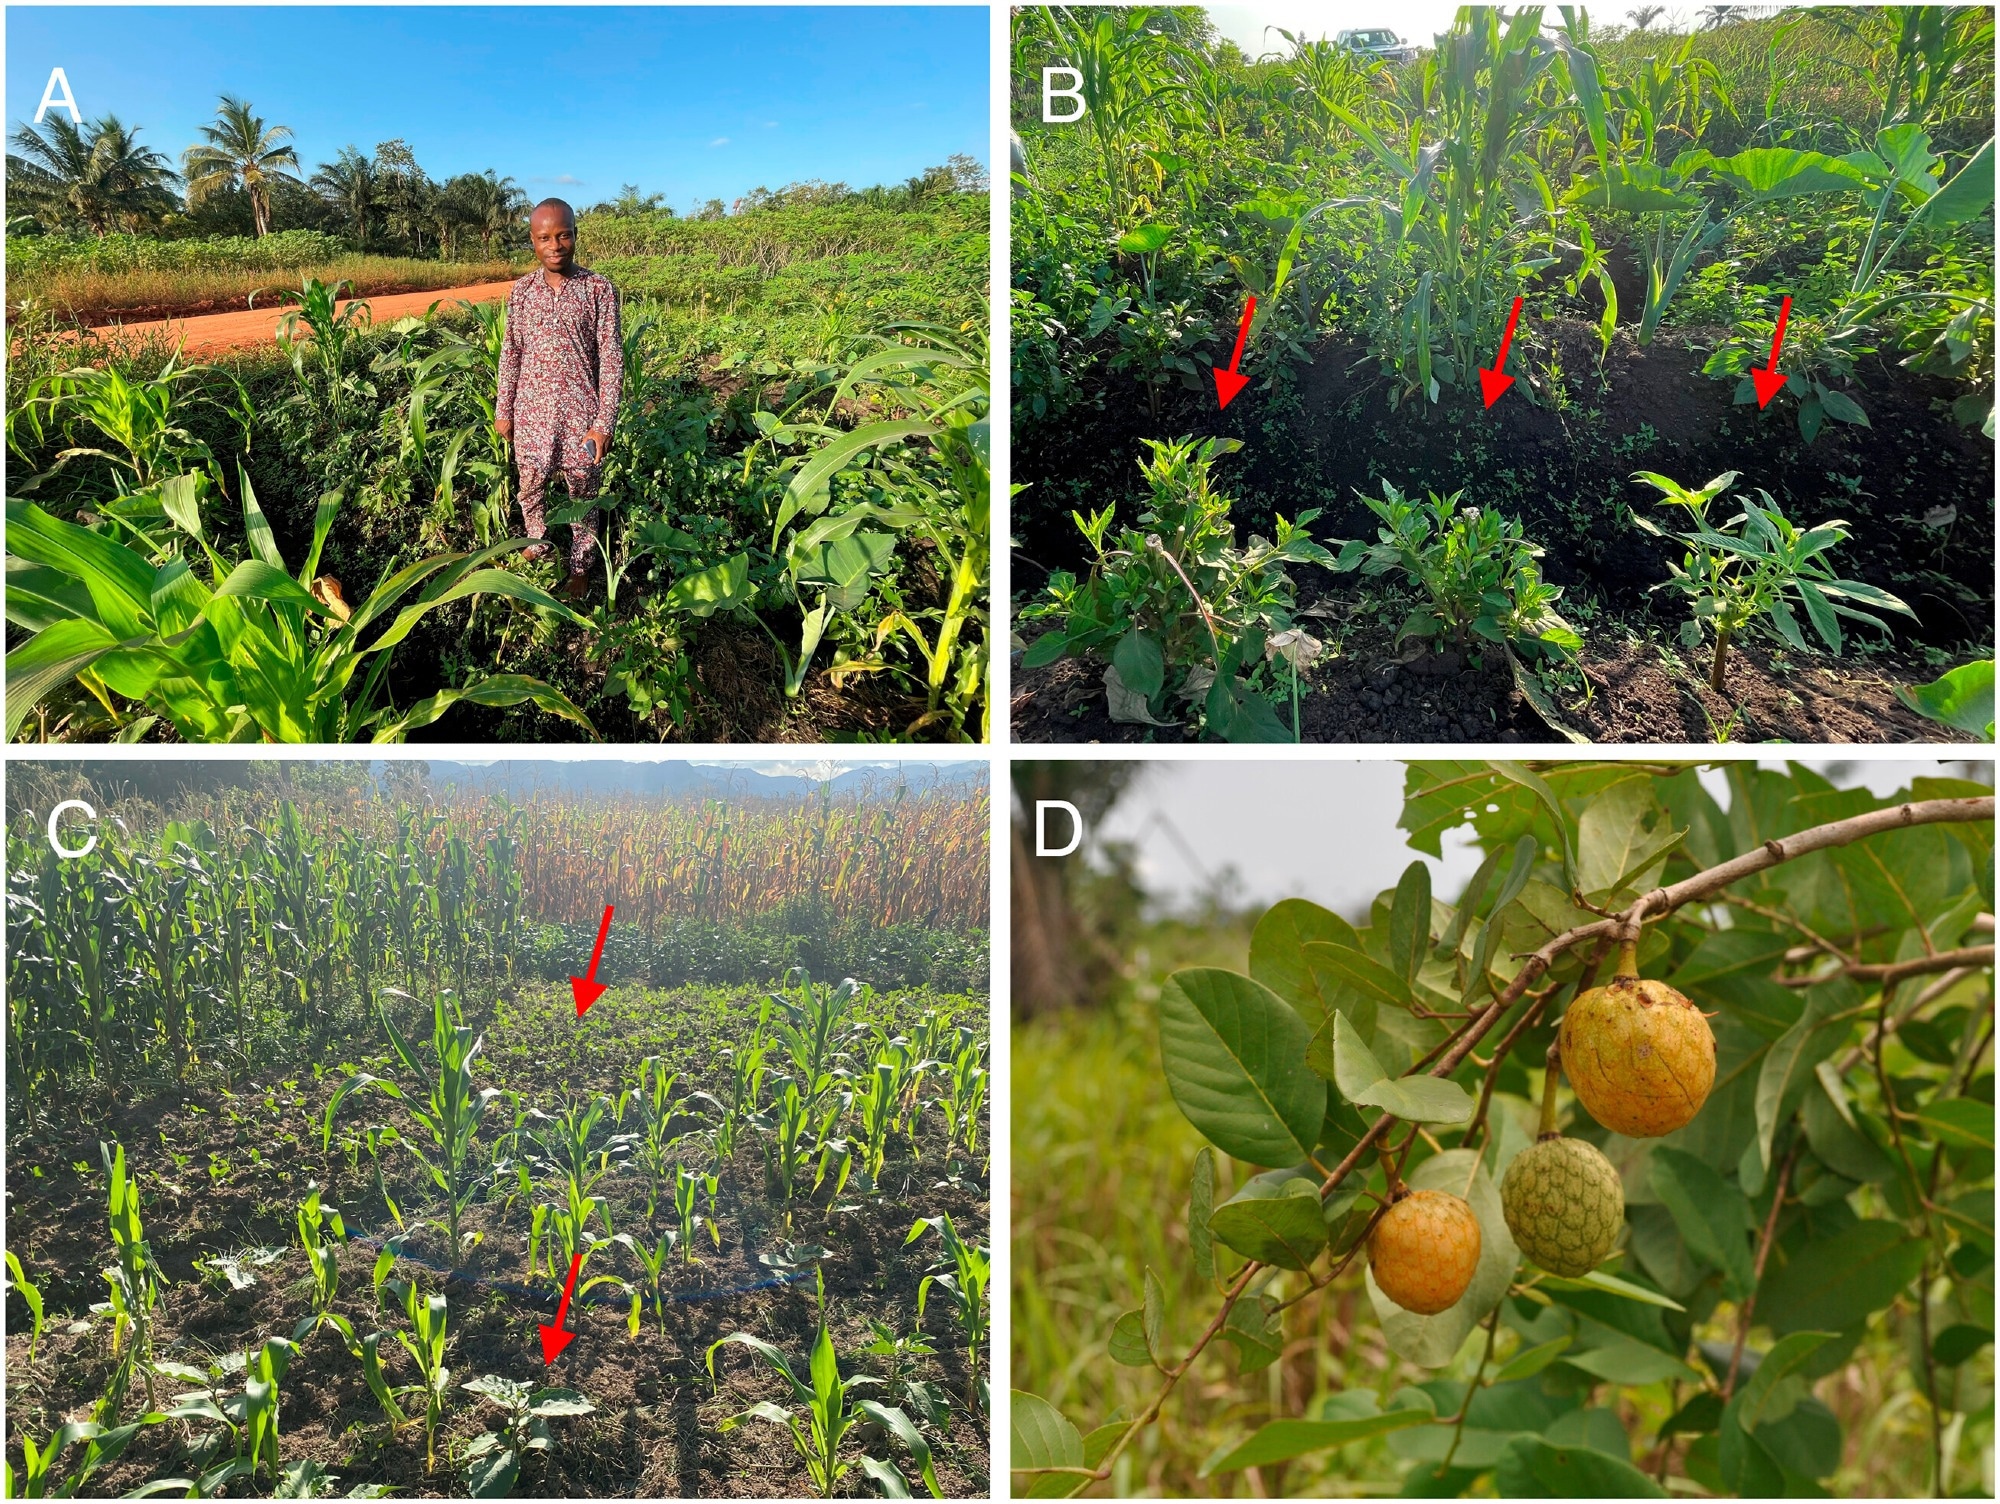 Examples of diversified cropping systems in sub-Saharan Africa that include forgotten food crops. Panel A: A Beninese farmer stands in his diversified farm field that includes Colocasia esculenta (taroyam), maize, Amaranthus spp. (amaranth), and Celosia argentea (celosia) within an agricultural landscape dominated by cassava. Panel B: Three different amaranth varieties in the forefront of the picture (arrowed) are being evaluated by the same farmer as part of a participatory variety evaluation experiment in Benin; Panel C: Maize cropping system diversified with leafy and fruit vegetables in Eswatini. In the front of the picture, maize is intercropped with Solanum aethiopicum (African eggplant, arrowed). At the back of the picture, amaranth has been sown between maize fields (arrowed). Panel D: The fruit crop Annona senegalensis (wild custard apple) is widely used in Benin. Photo credits: Sognigbé N’Danikou, World Vegetable Center (panels A and B); Maarten van Zonneveld, World Vegetable Center (panel C); Enoch G. Achigan-Dako, University of Abomey-Calavi (panel D)